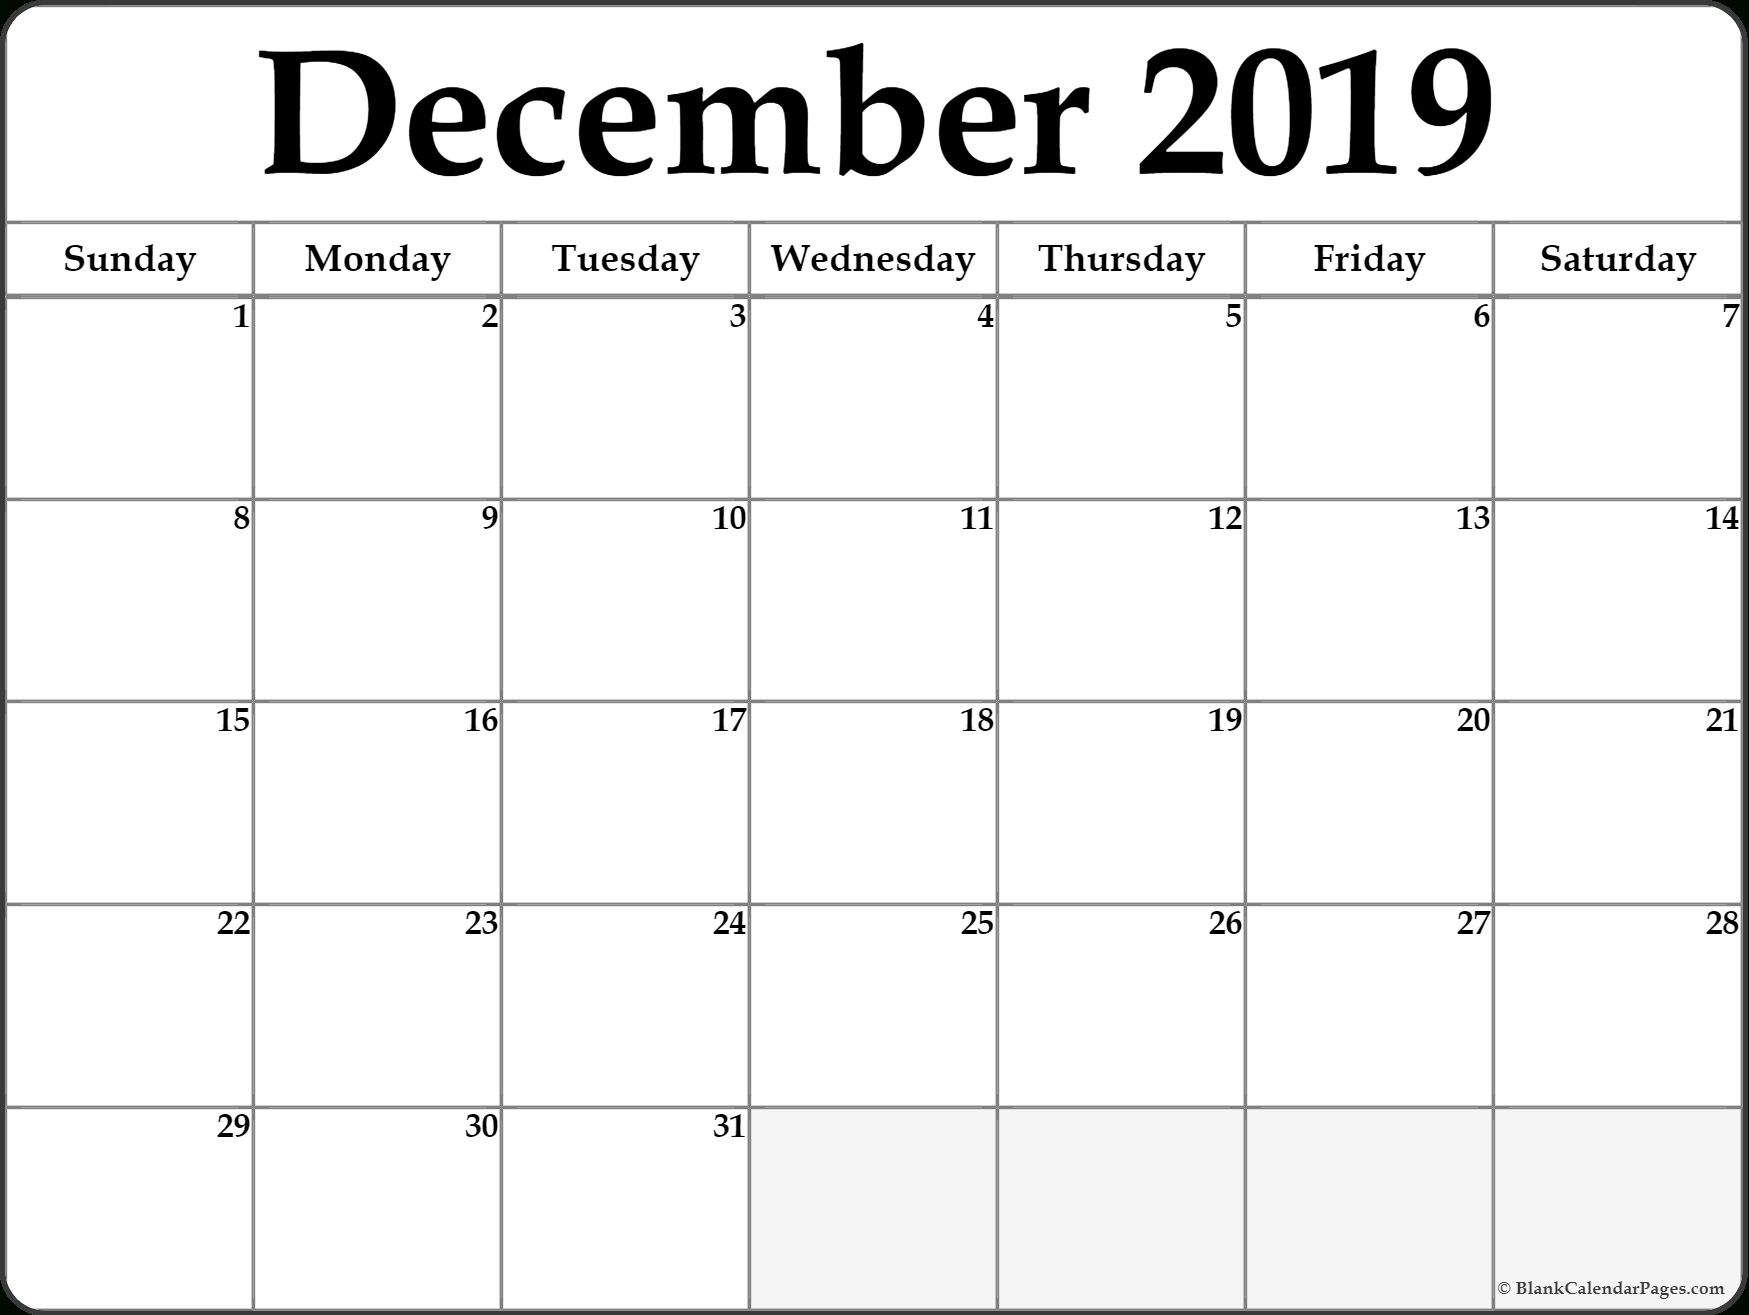 Dec 2019 Blank Calendars To Print Without Downloading